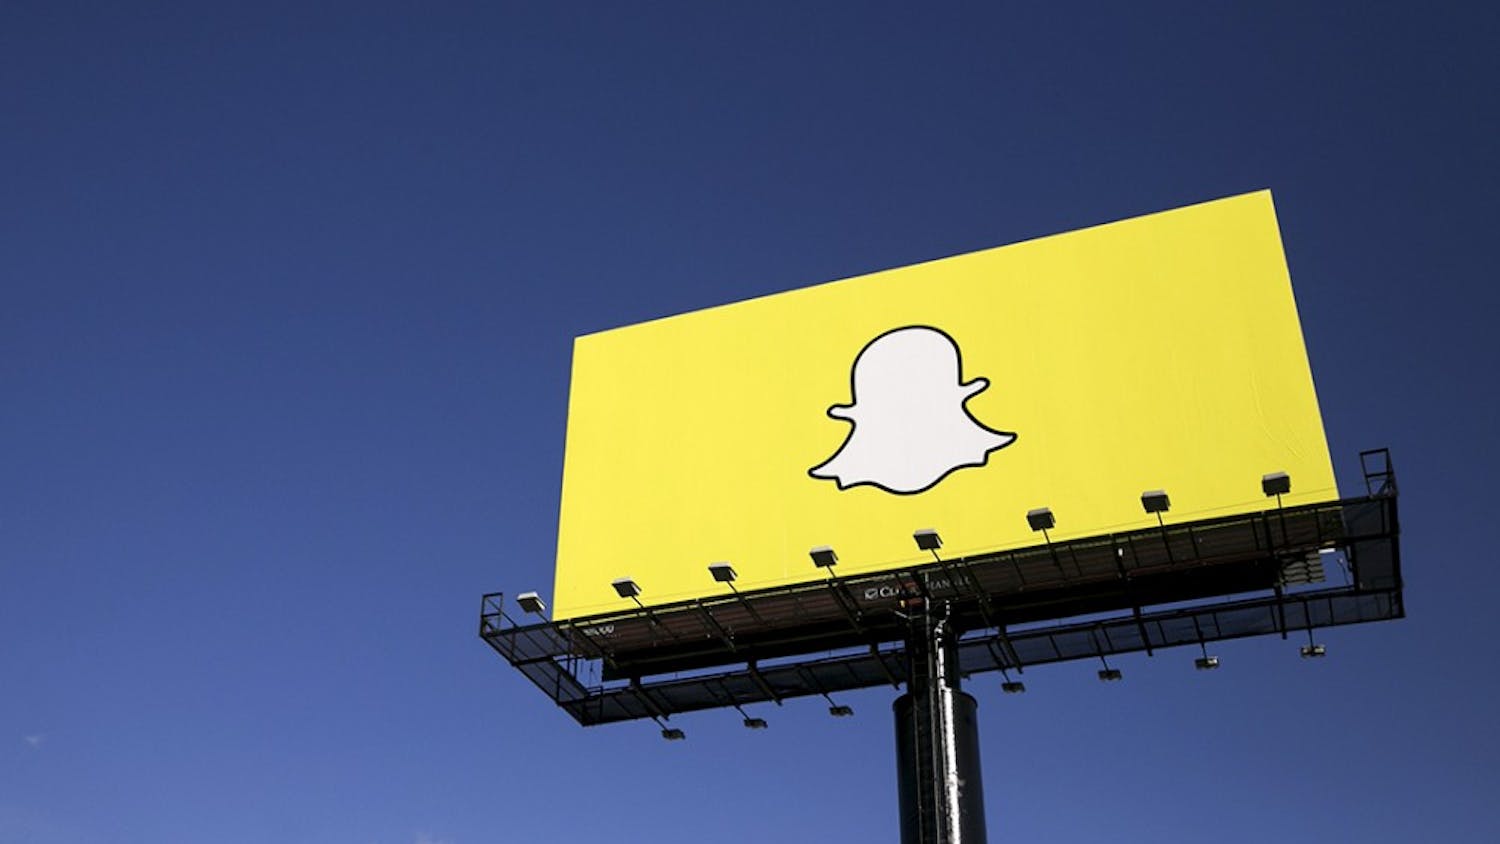 Snapchat&apos;s explanation for its mysterious billboards is as vague as the ads: &quot;Fun and awareness.&quot; Above, one of its billboards in Richfield, Minn., in October. (Kristoffer Tripplaar/Sipa USA/TNS)